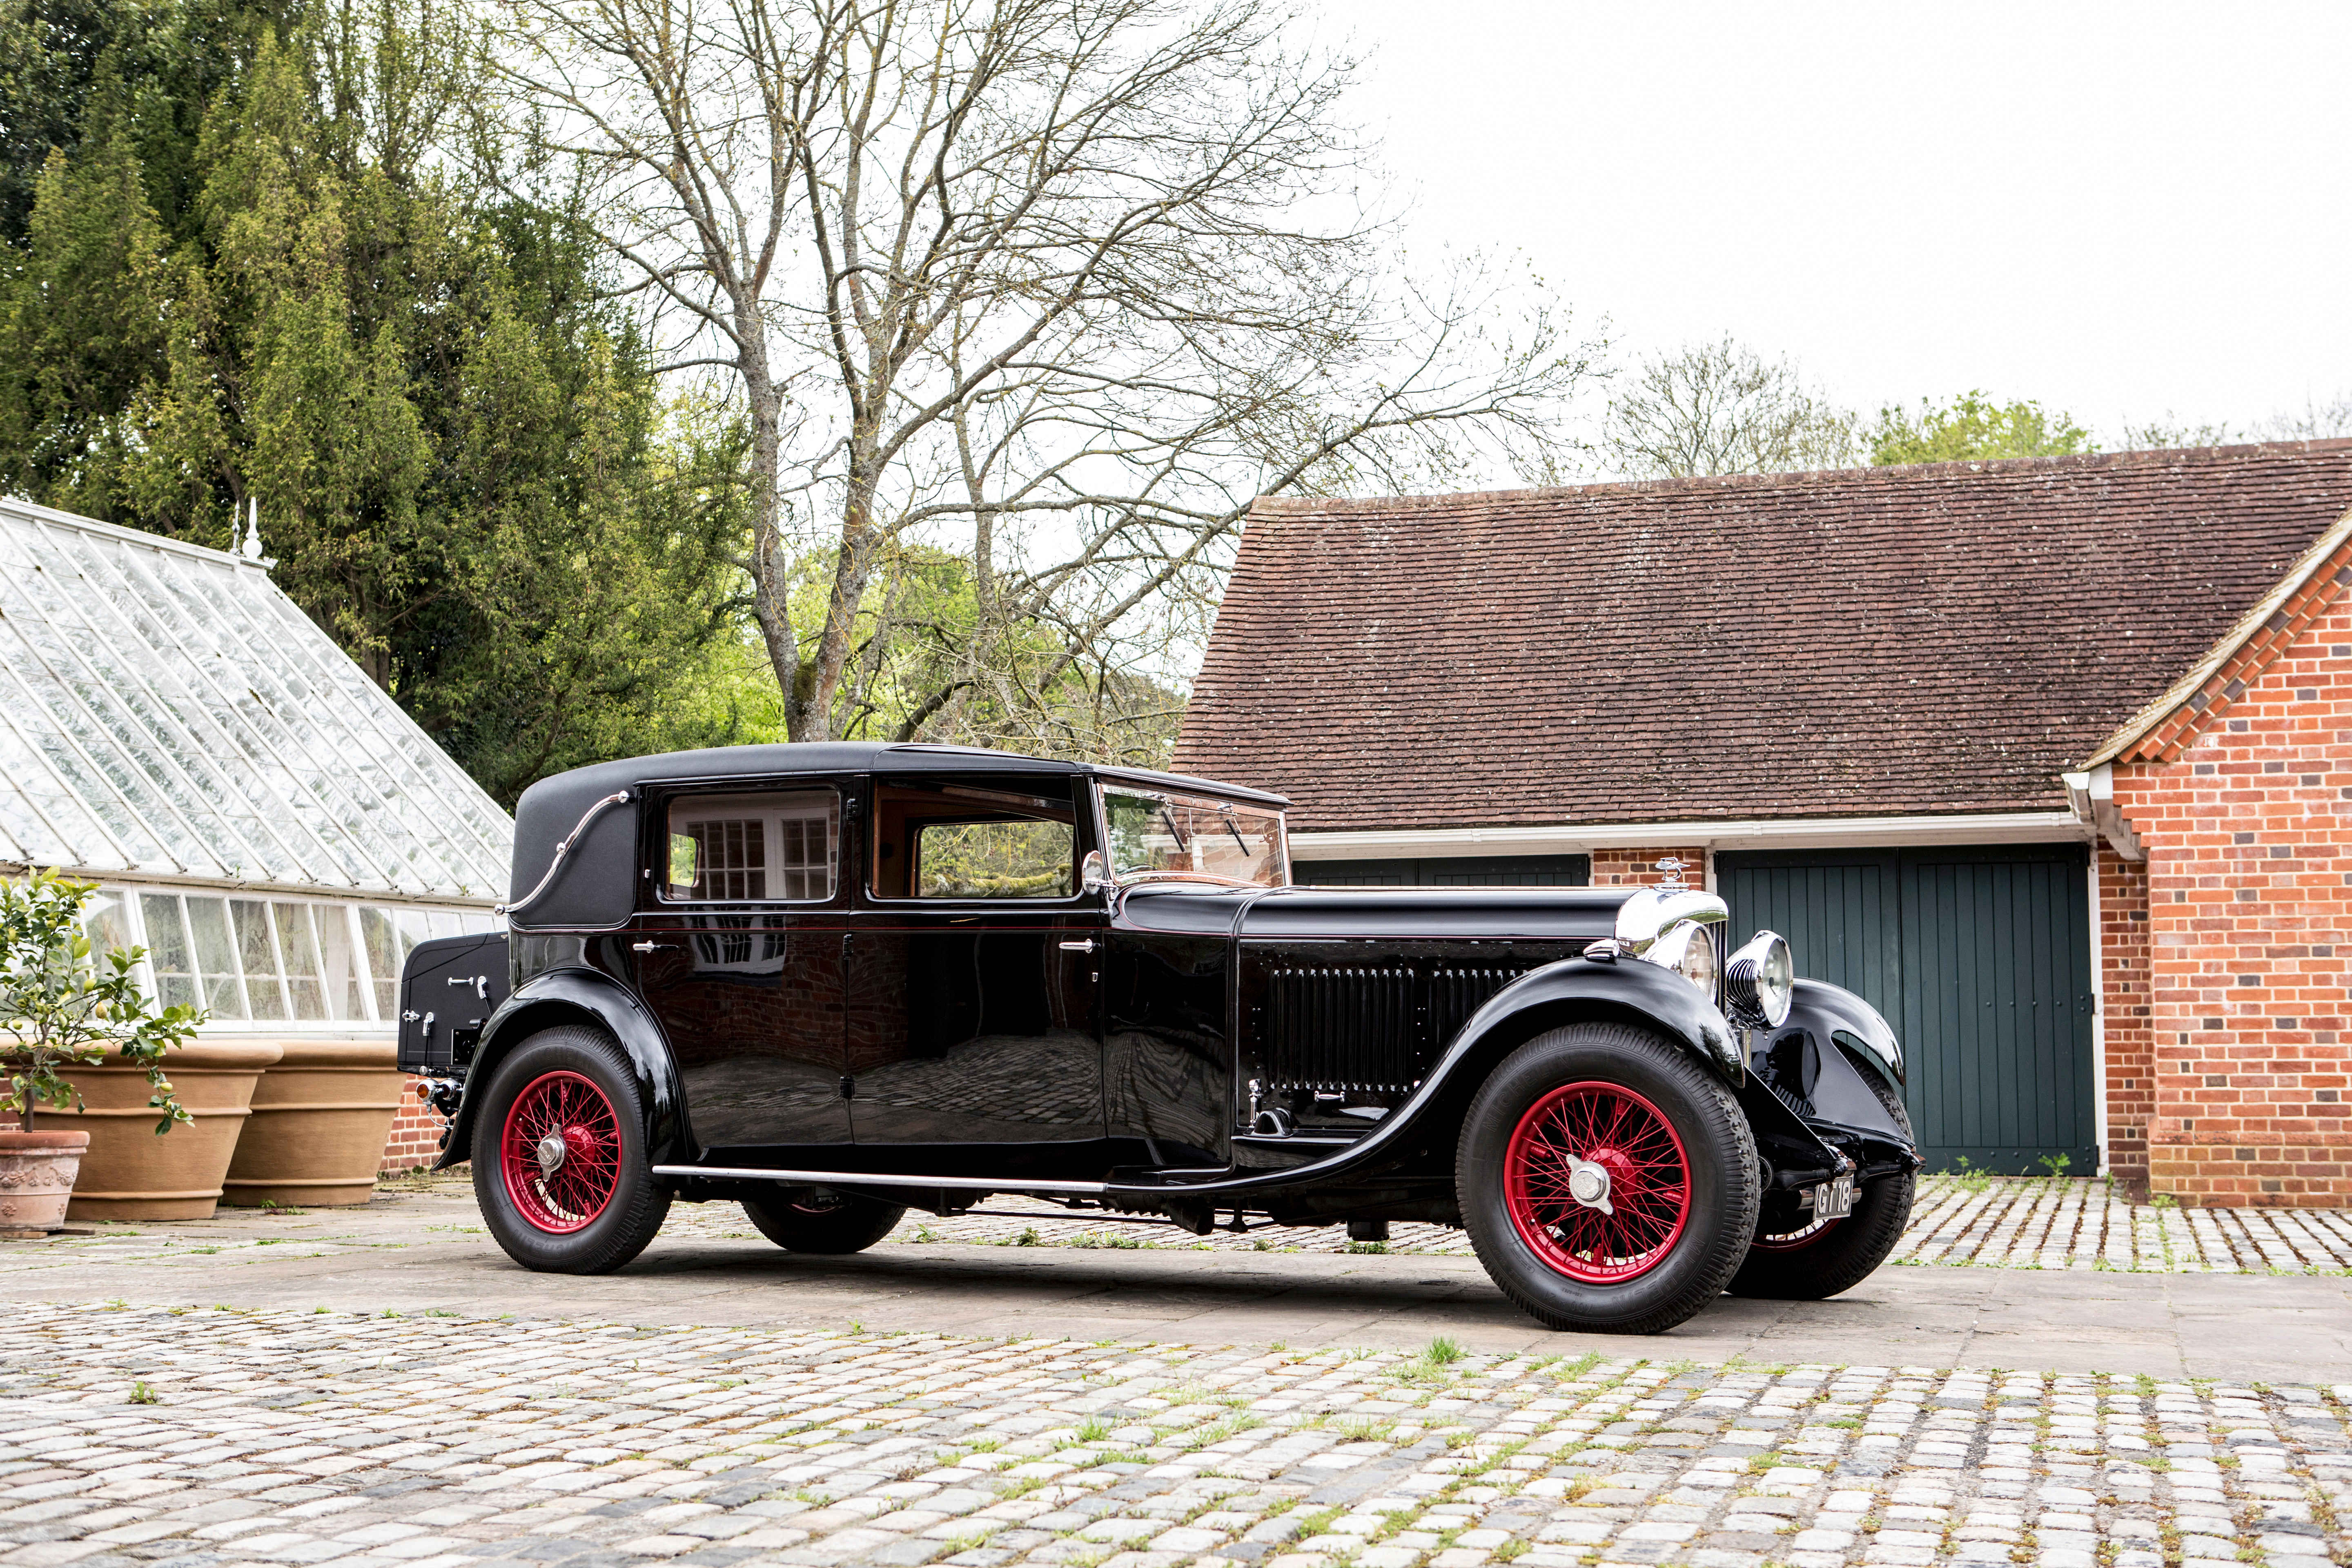 ‘MOTORING IN ITS VERY HIGHEST FORM’: OPULENT BENTLEYS AND LUXURIOUS ROLLS-ROYCES AT BONHAMS FESTIVAL OF SPEED SALE cover